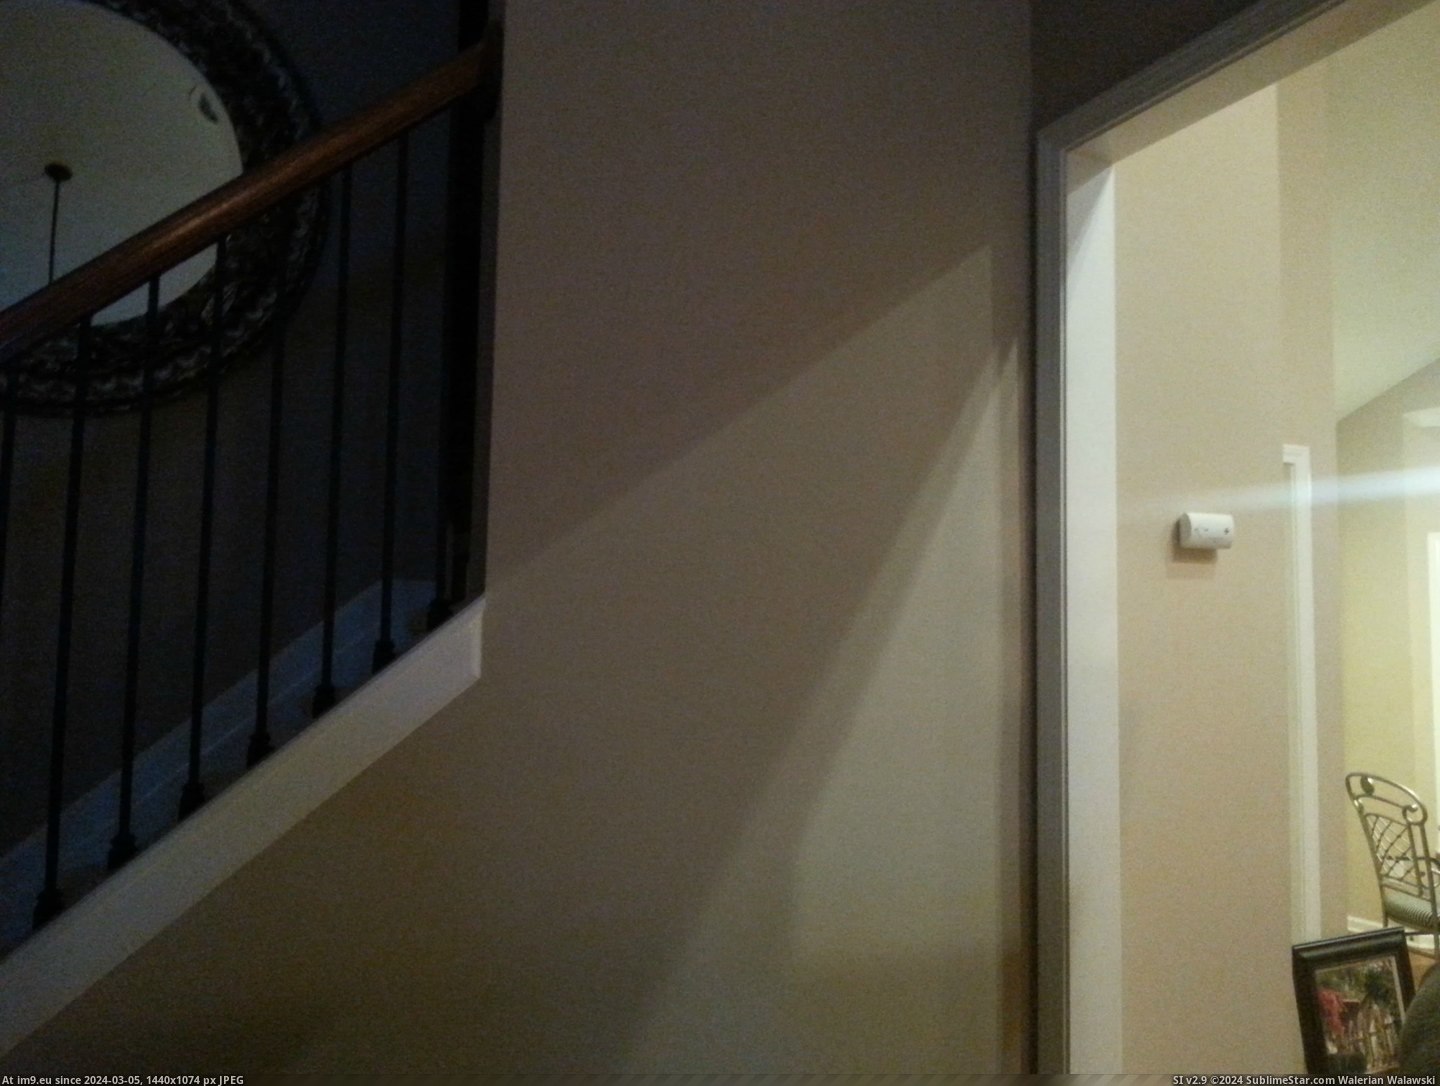 #Lines #Light #Baseboard #Stairs #Doorway [Mildlyinteresting] The light from the doorway lines up with the baseboard of the stairs Pic. (Изображение из альбом My r/MILDLYINTERESTING favs))